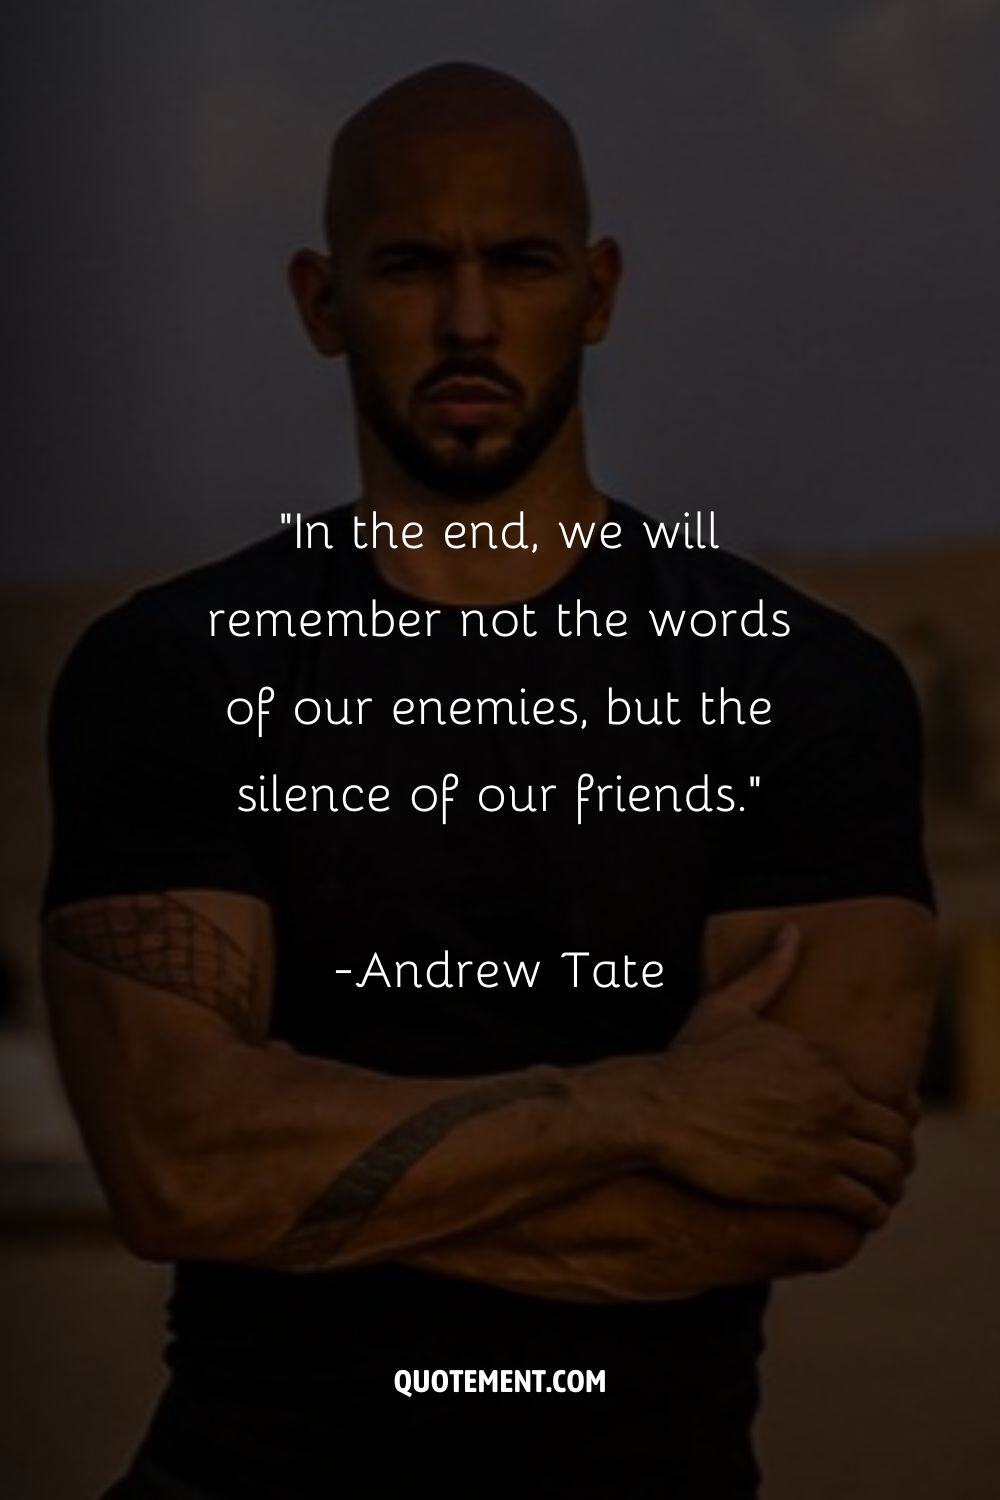 “In the end, we will remember not the words of our enemies,  but the silence of our friends.”